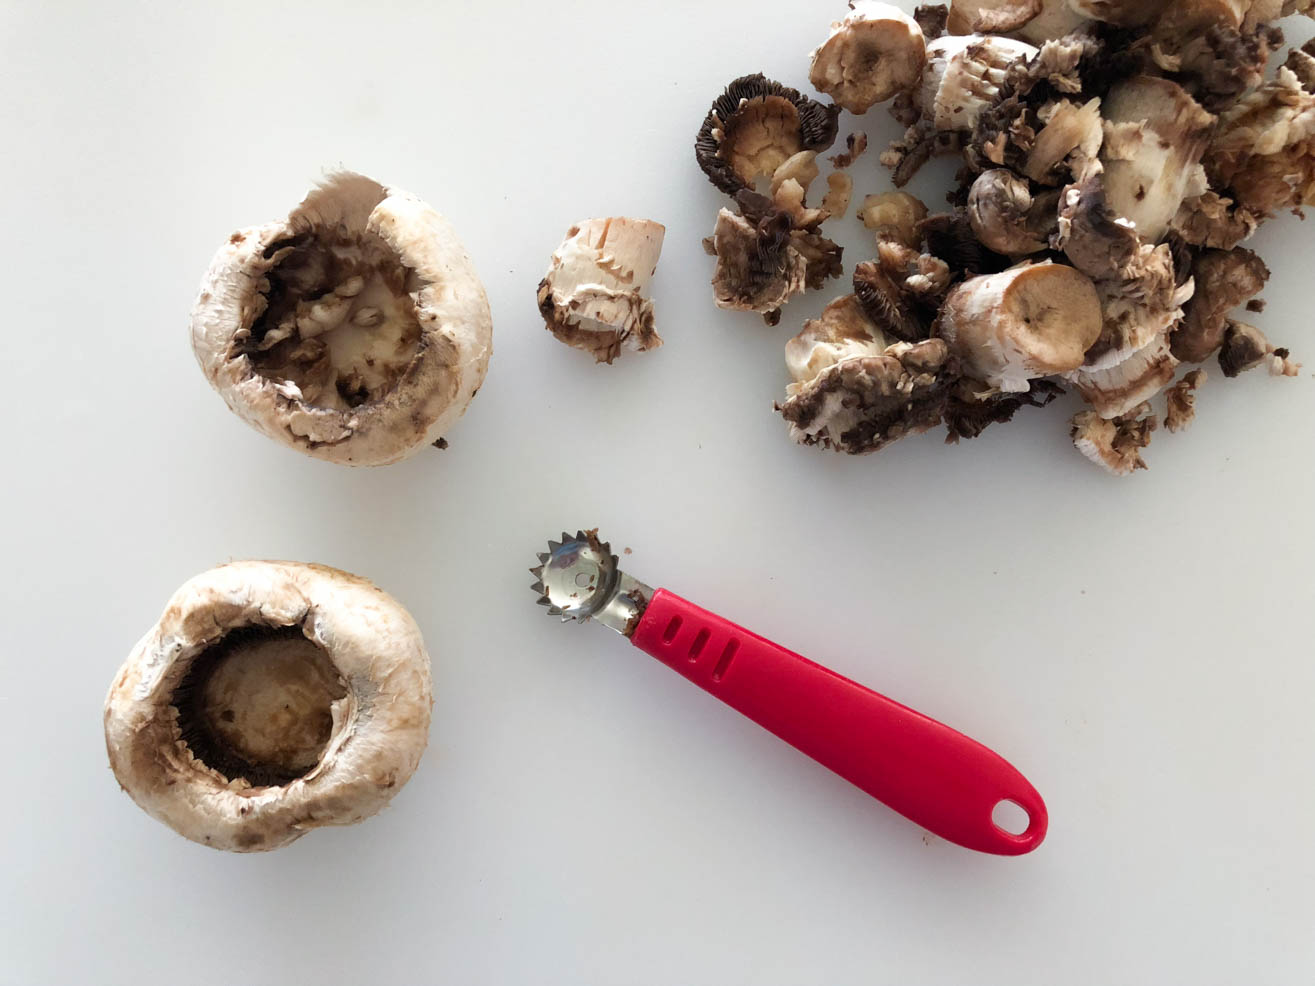 How to clean the mushrooms for stuffed mushrooms with a scoop